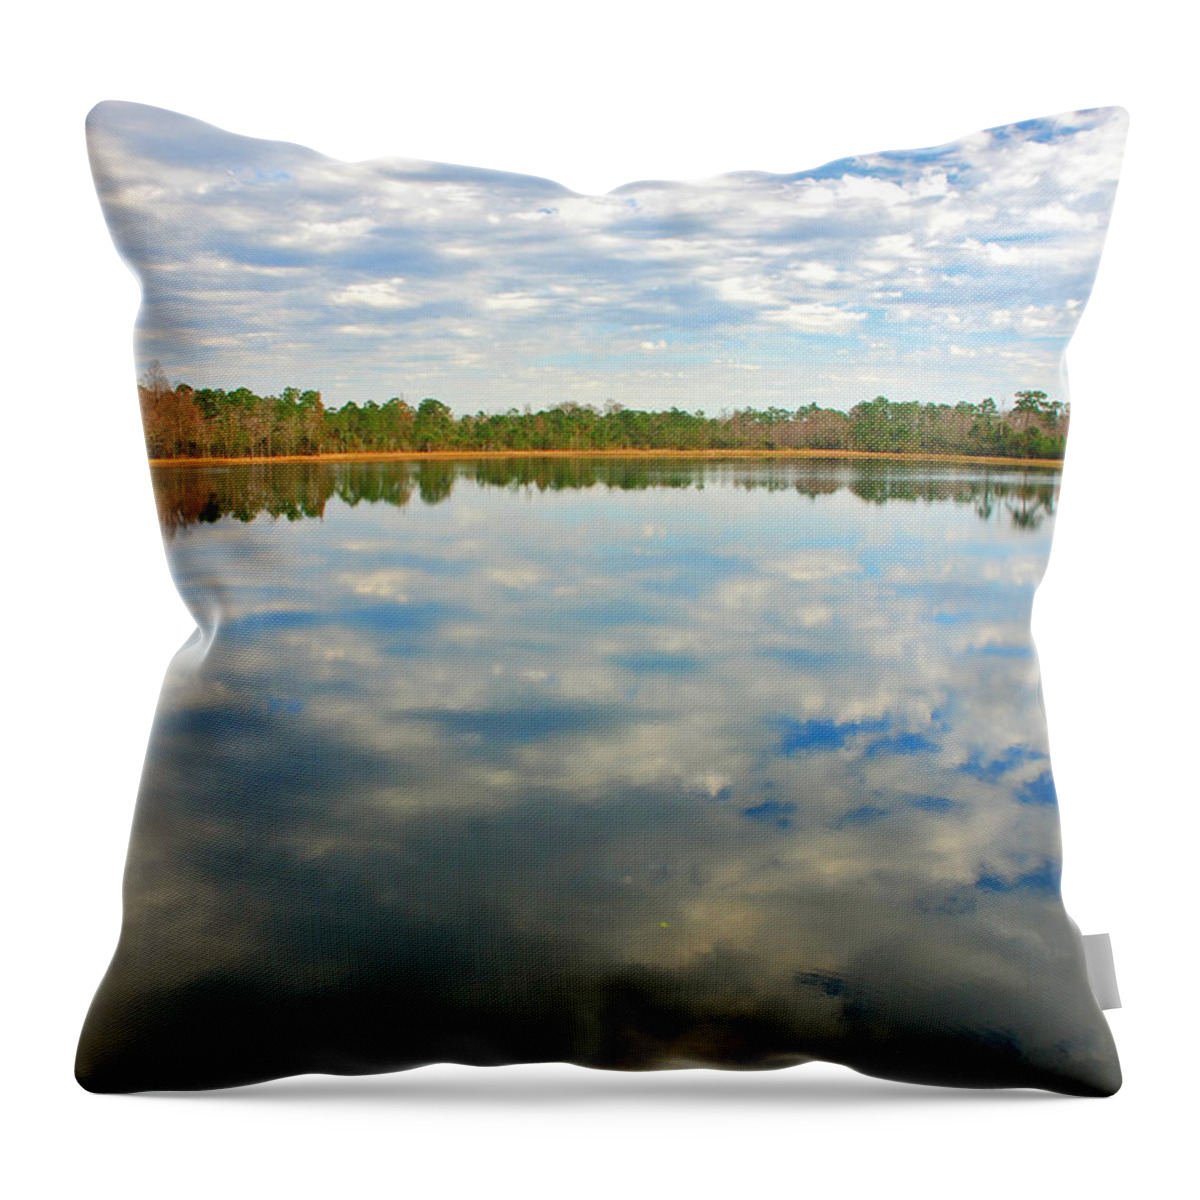  Throw Pillow featuring the photograph 39- Reflections by Joseph Keane